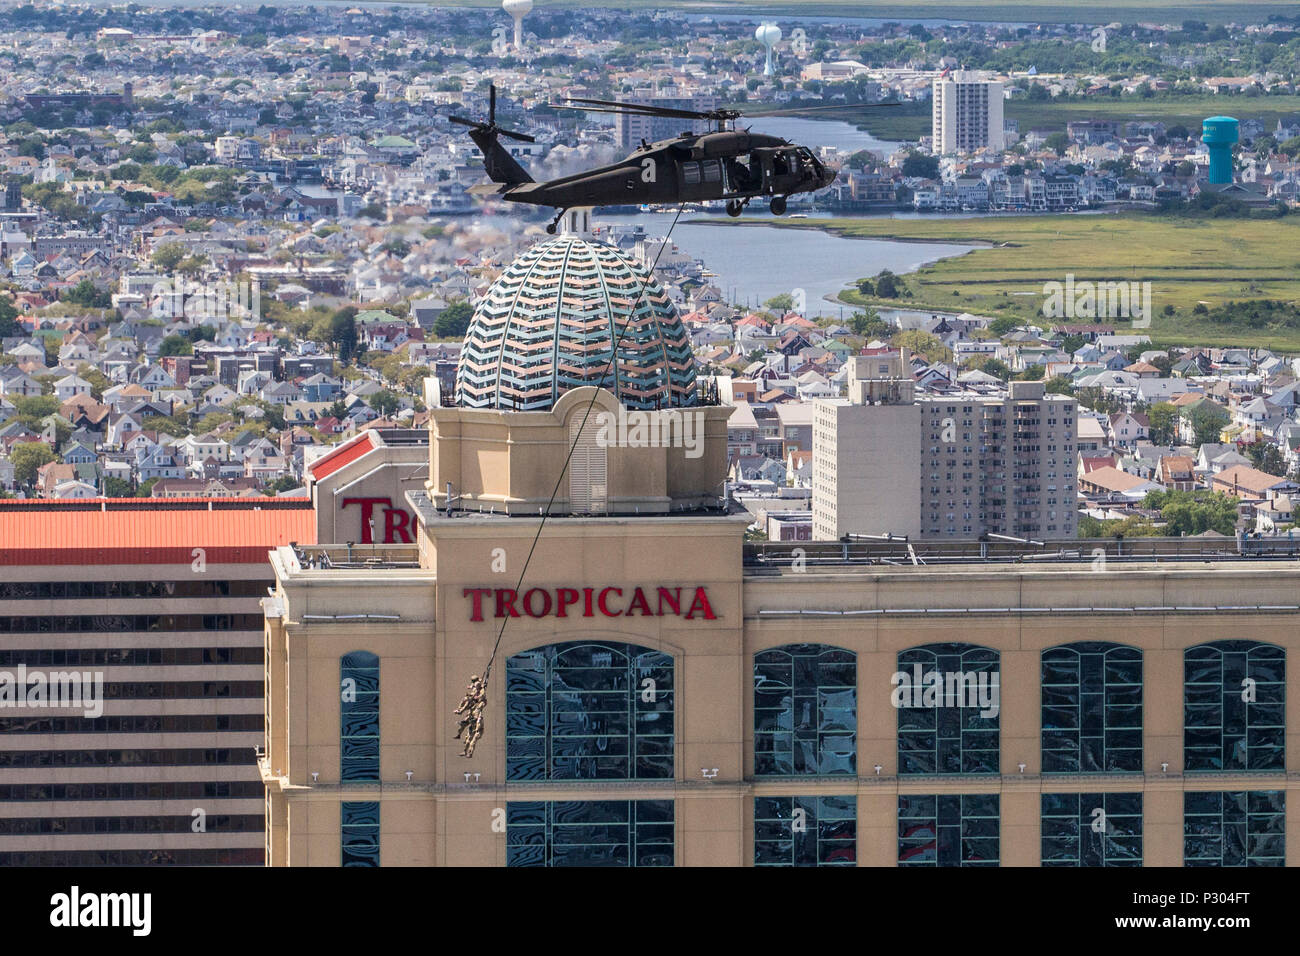 UH-60 Black Hawks with the 1-150th Assault Helicopter Battalion, New Jersey Army National Guard, lift Tactical Air Control Party Airmen with the 227th Air Support Operations Squadron, New Jersey Air National Guard, after presenting a Special Purpose Insertion Extraction (SPIES) demonstration at the 2016 Atlantic City Airshow above the Atlantic City, N.J., boardwalk Aug. 17, 2016. SPIES is used for extracting special operations personnel when an aircraft cannot land. The 1-150th is located at Joint Base McGuire-Dix-Lakehurst while the 227th is located at the Atlantic City Air National Guard Bas Stock Photo